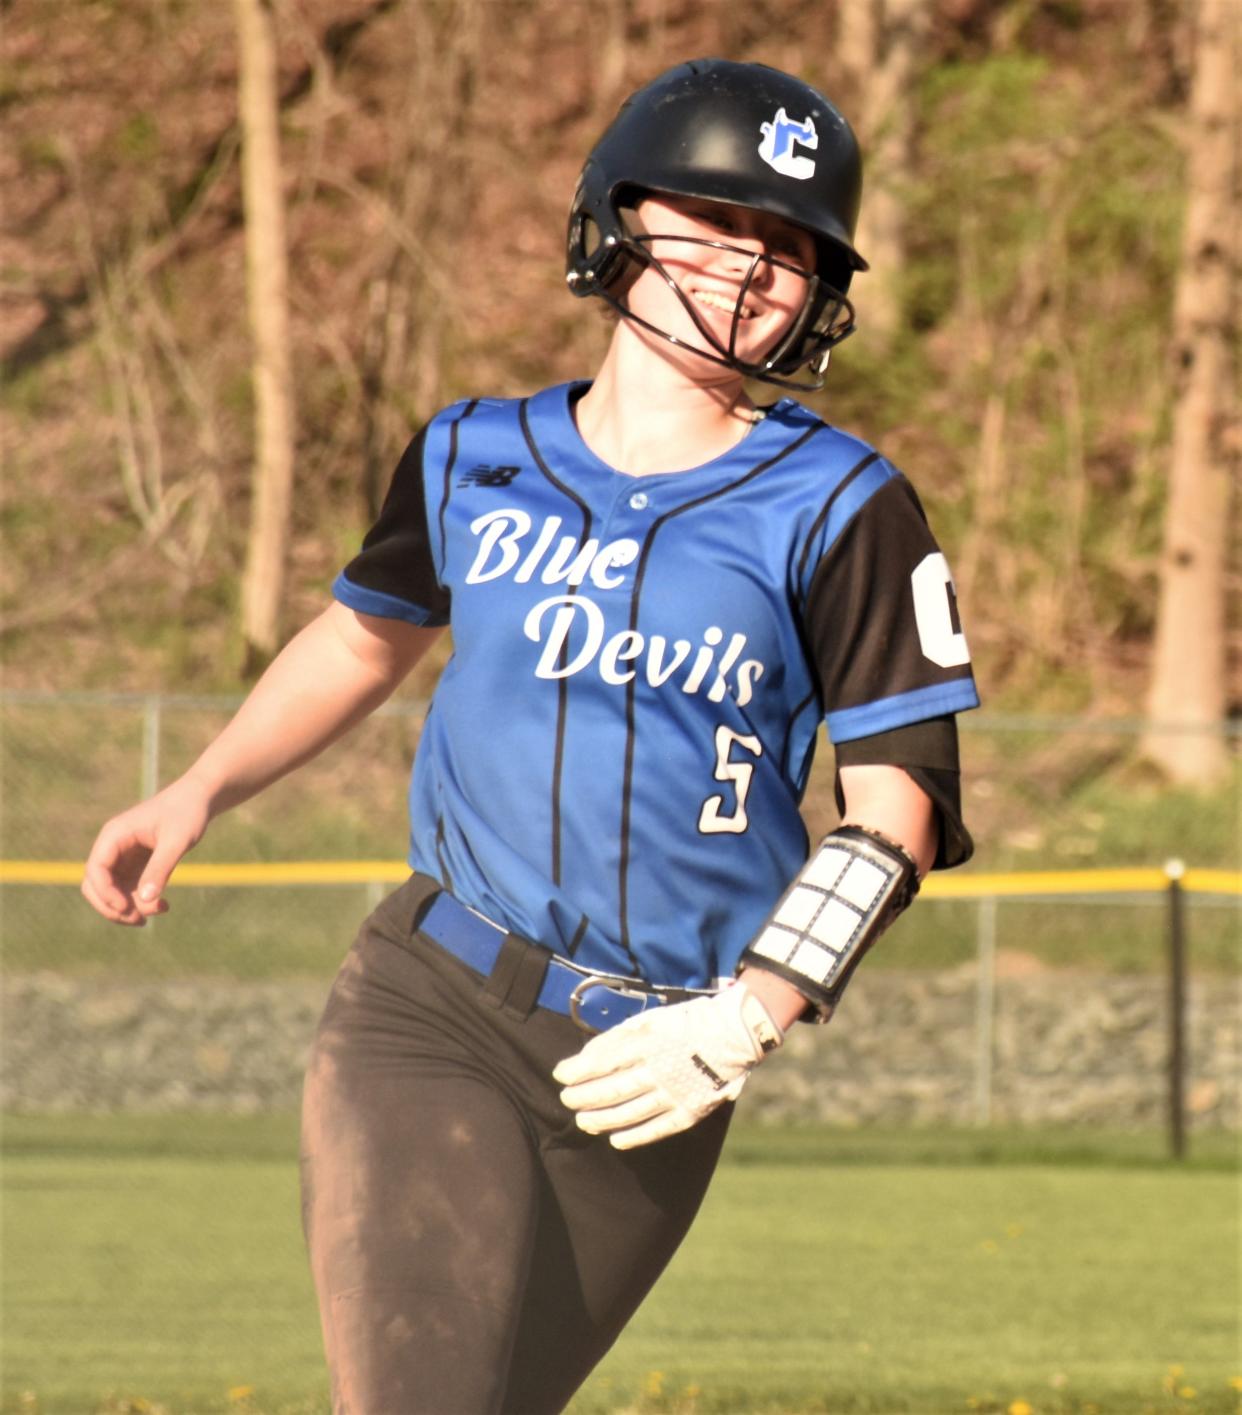 Freshman Amber Shenk rounds the bases with one of four Camden home runs hit in the fifth inning of Friday's game. The win over Central Valley Academy at Lower Tolpa was Camden's eighth in a row to start the season.